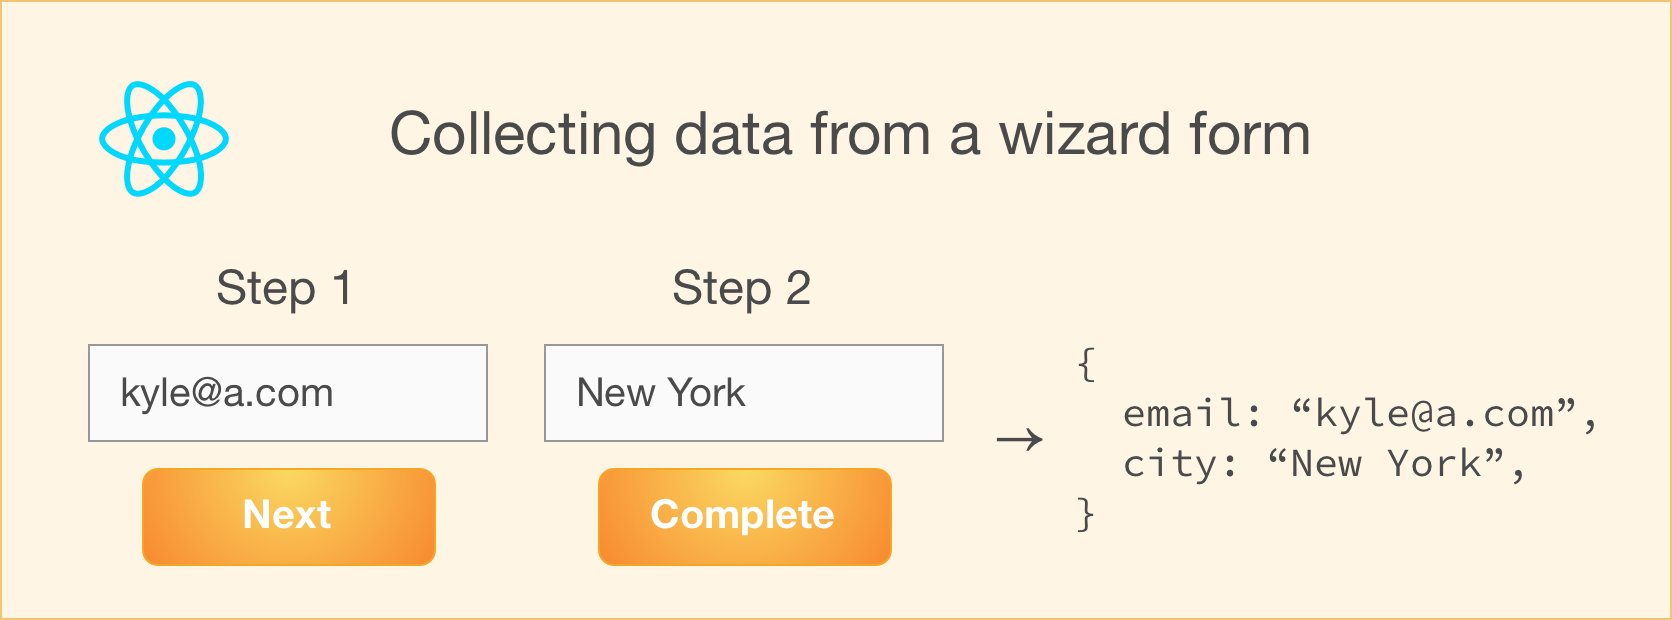 Cover image: Collecting data from a wizard form